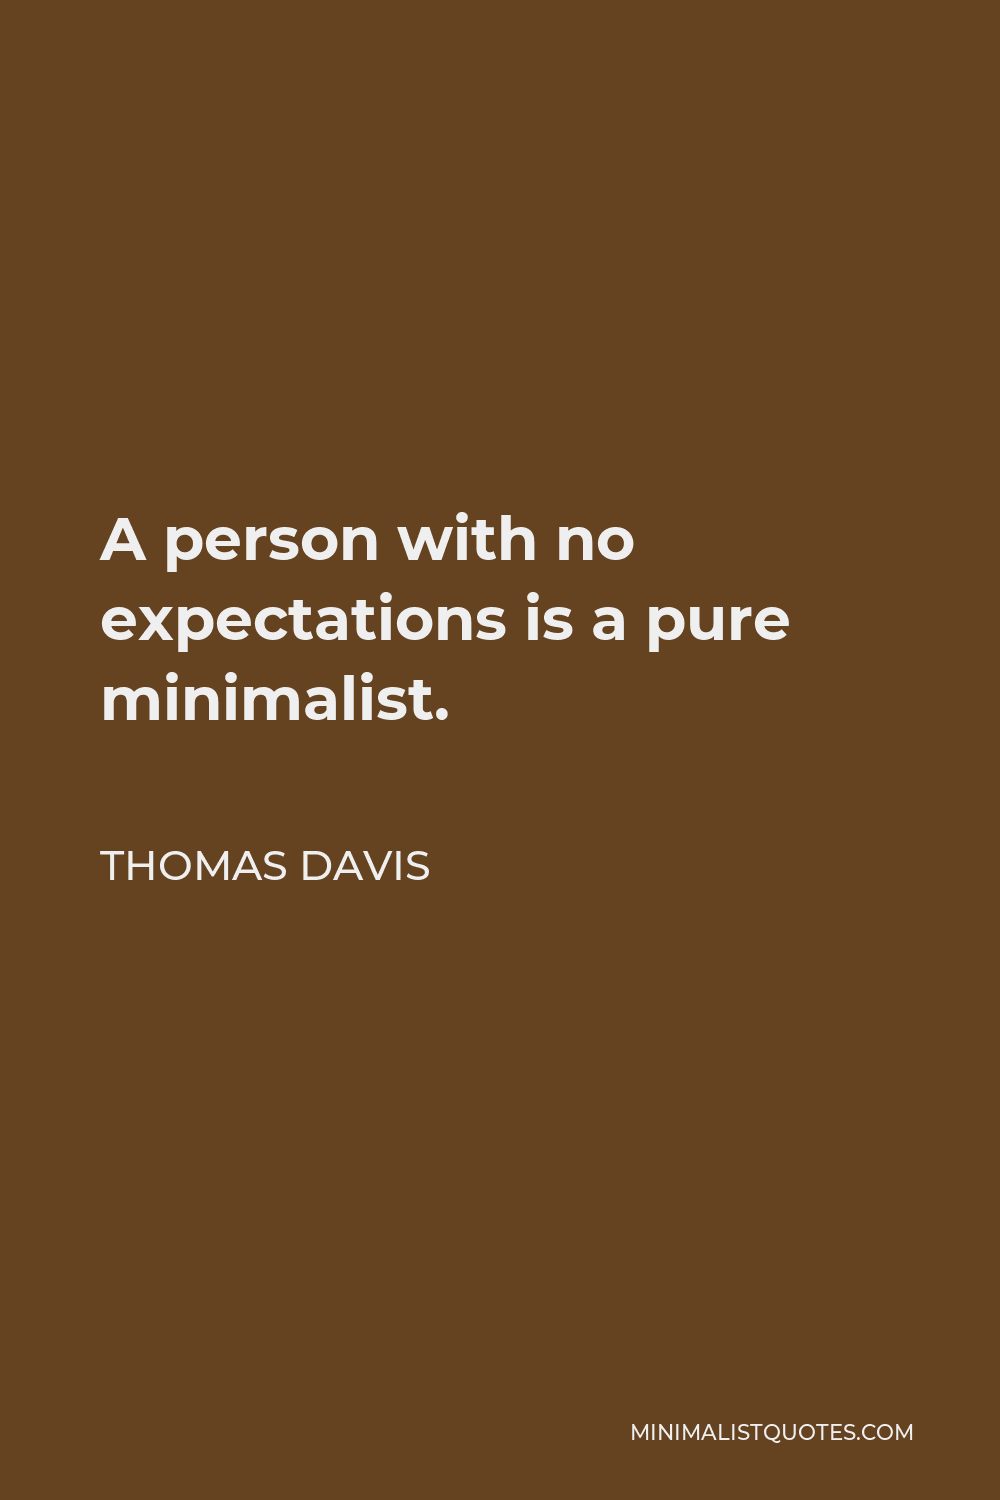 Thomas Davis Quote - A person with no expectations is a pure minimalist.